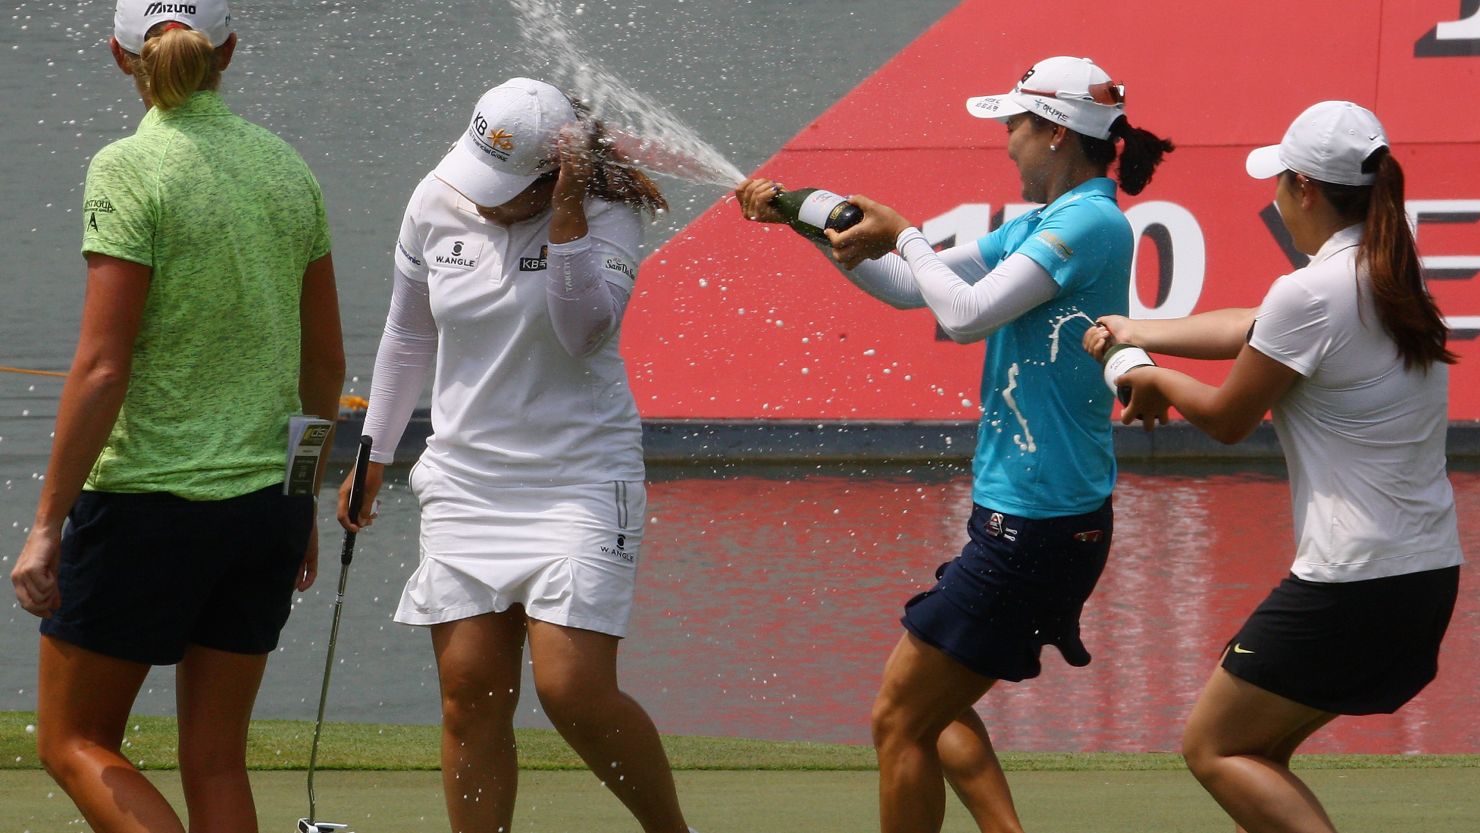 Inbee Park is drenched with bubbly after winning the HSBC Women's Champions at Sentosa Golf Club.